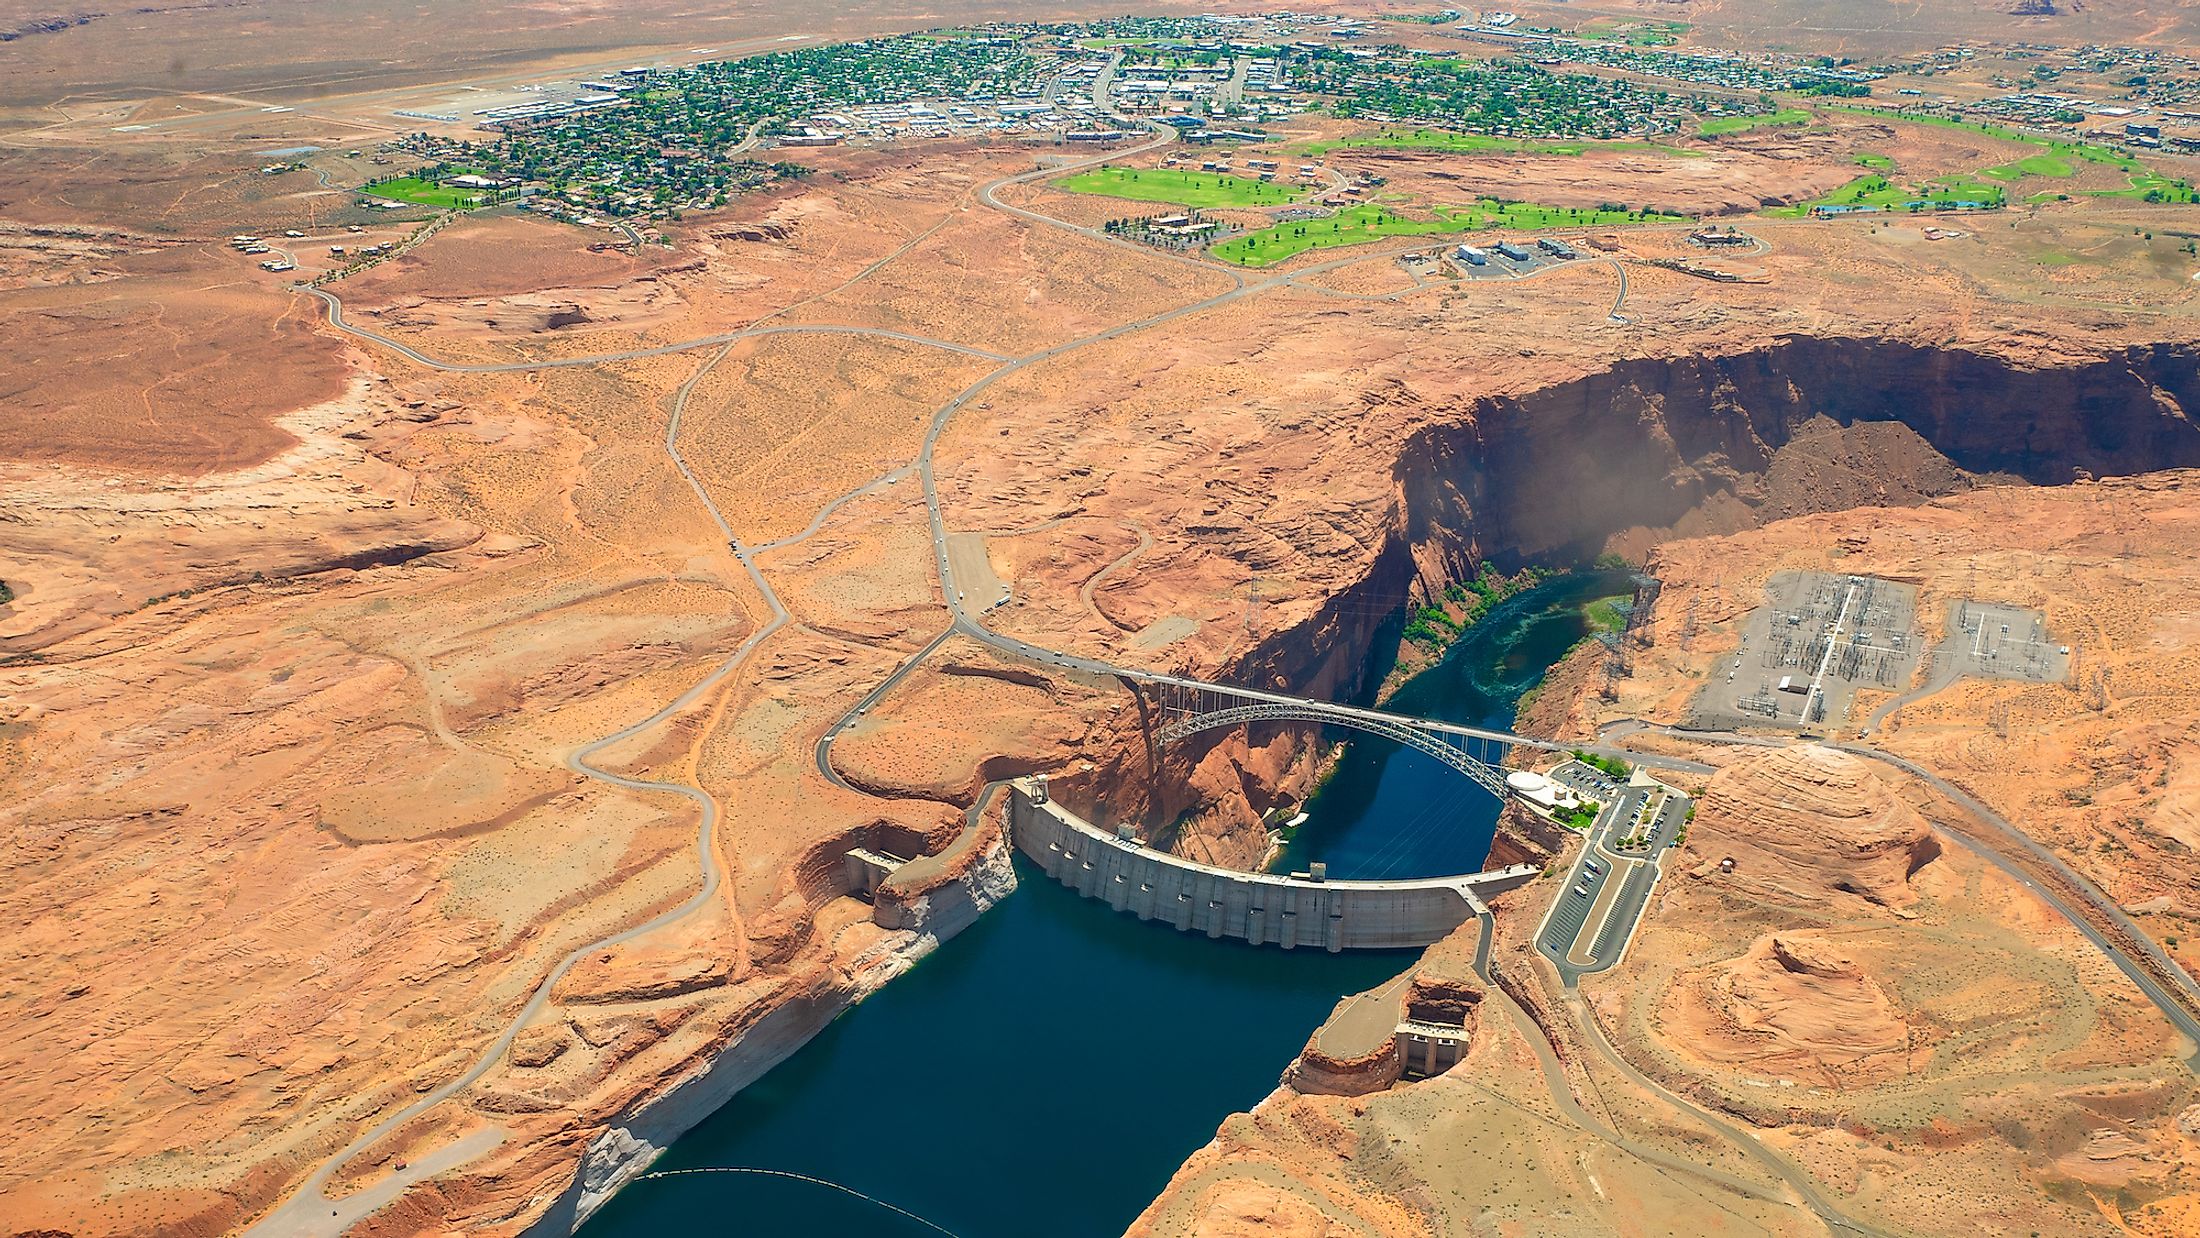 Panoramic view of the Glen Canyon Dam